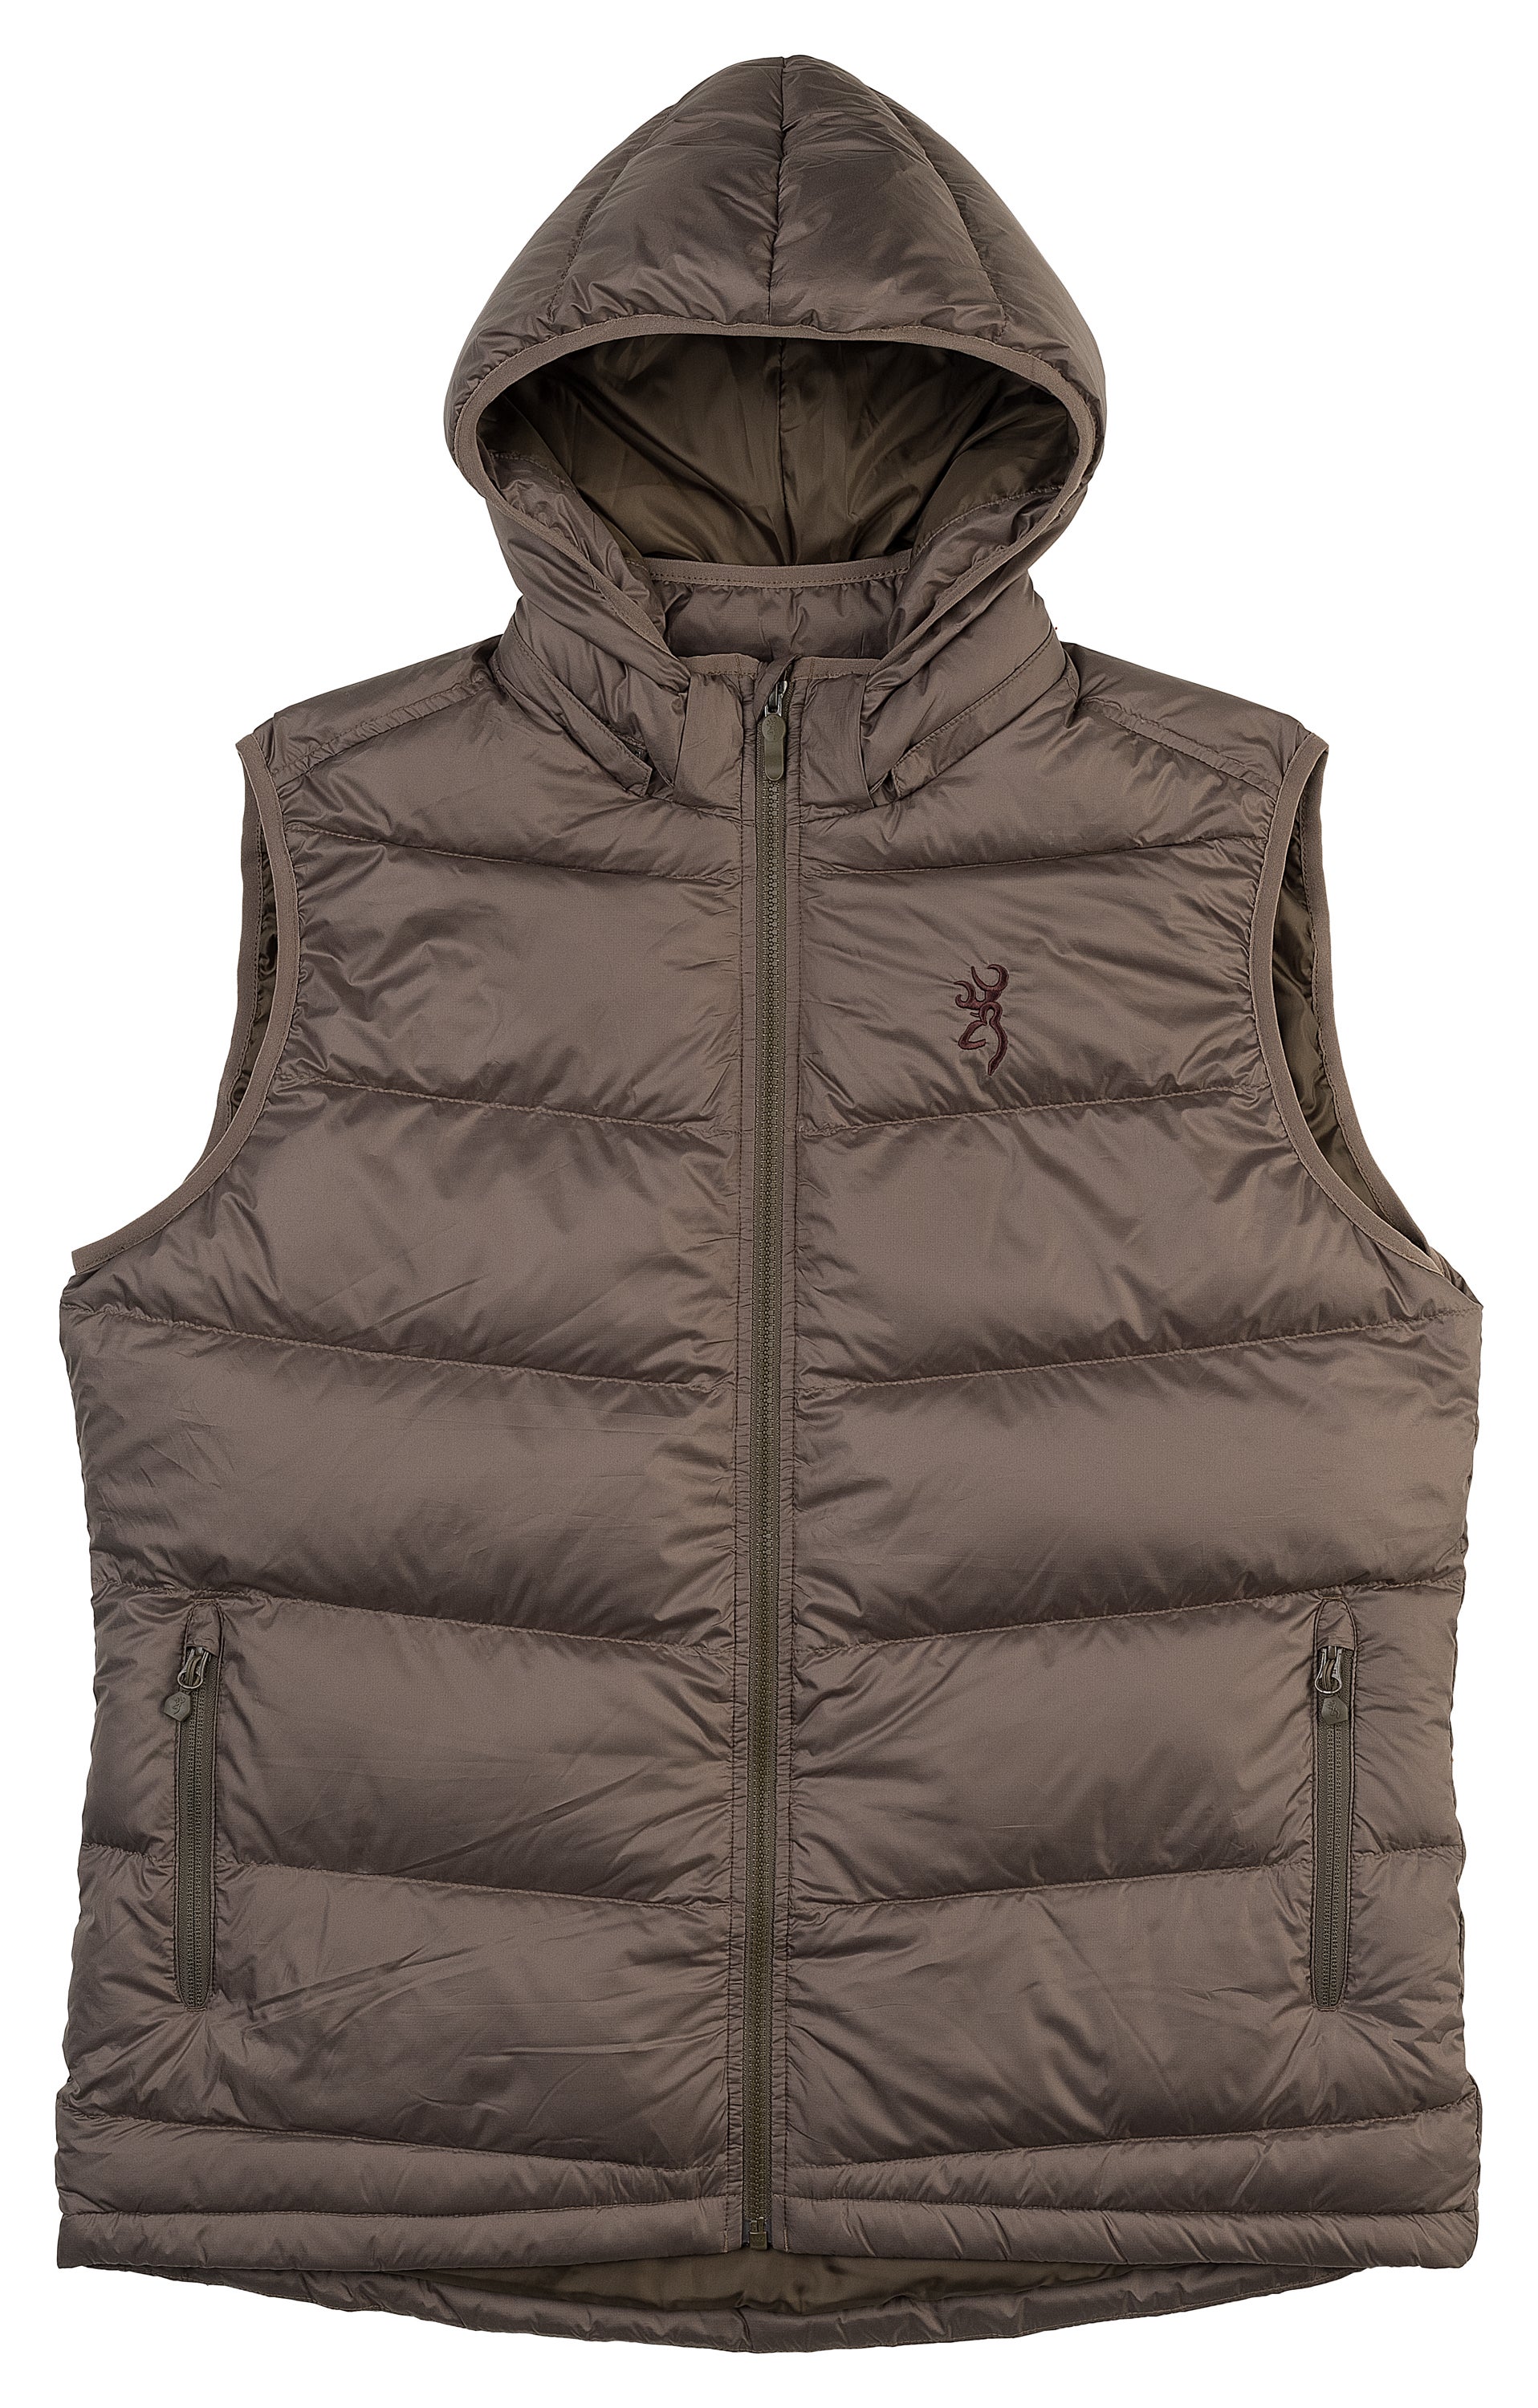 Arctic Down Vest - Hunting Clothing - Browning